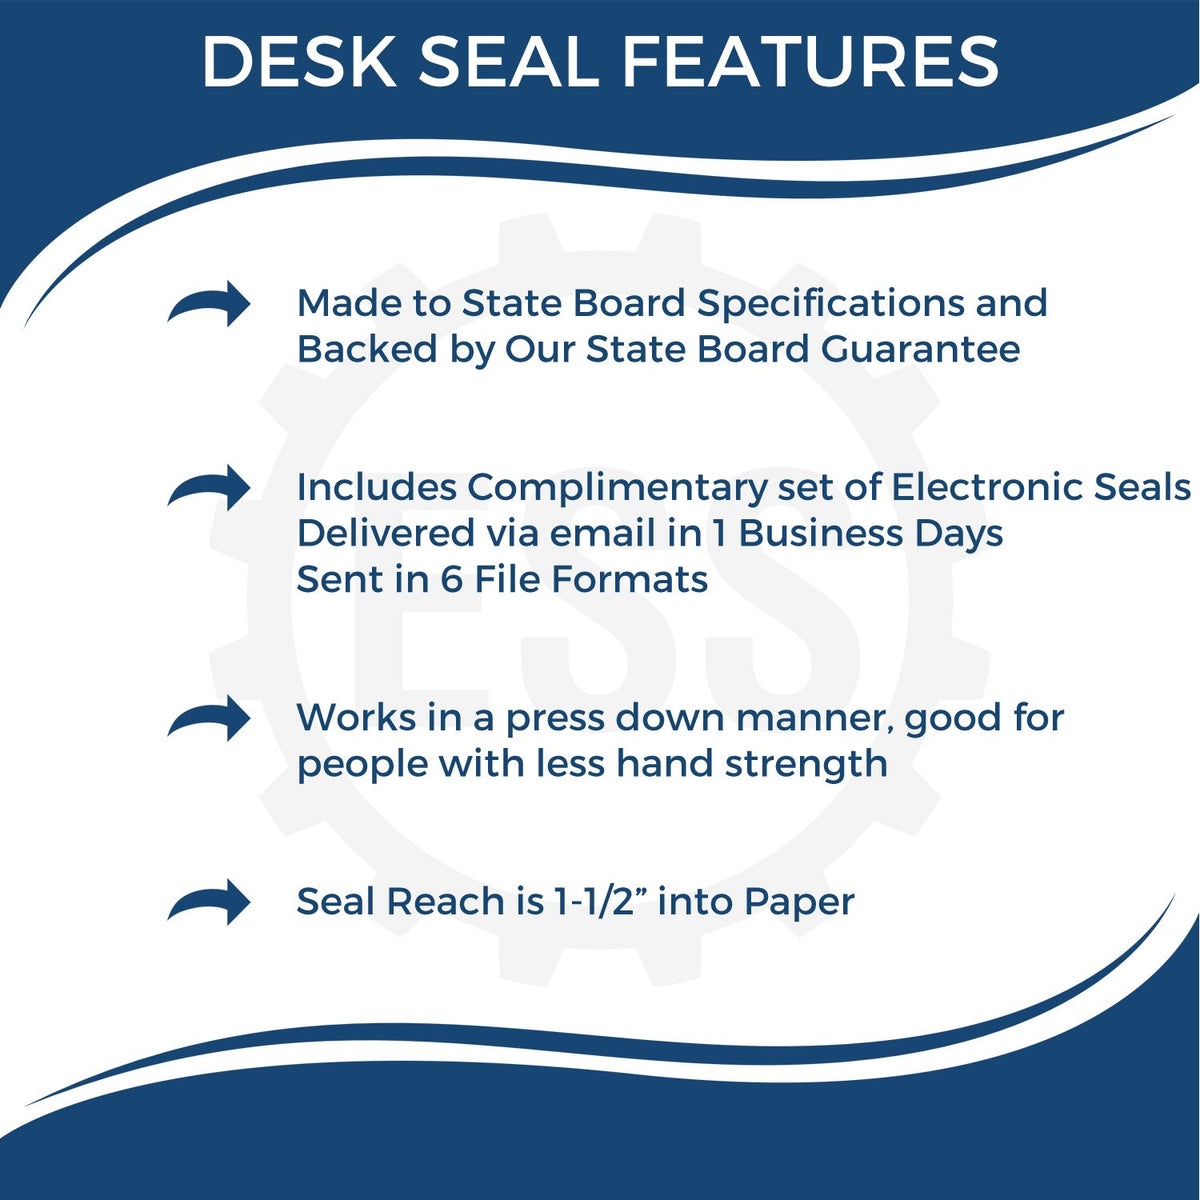 A picture of an infographic highlighting the selling points for the Mississippi Engineer Desk Seal